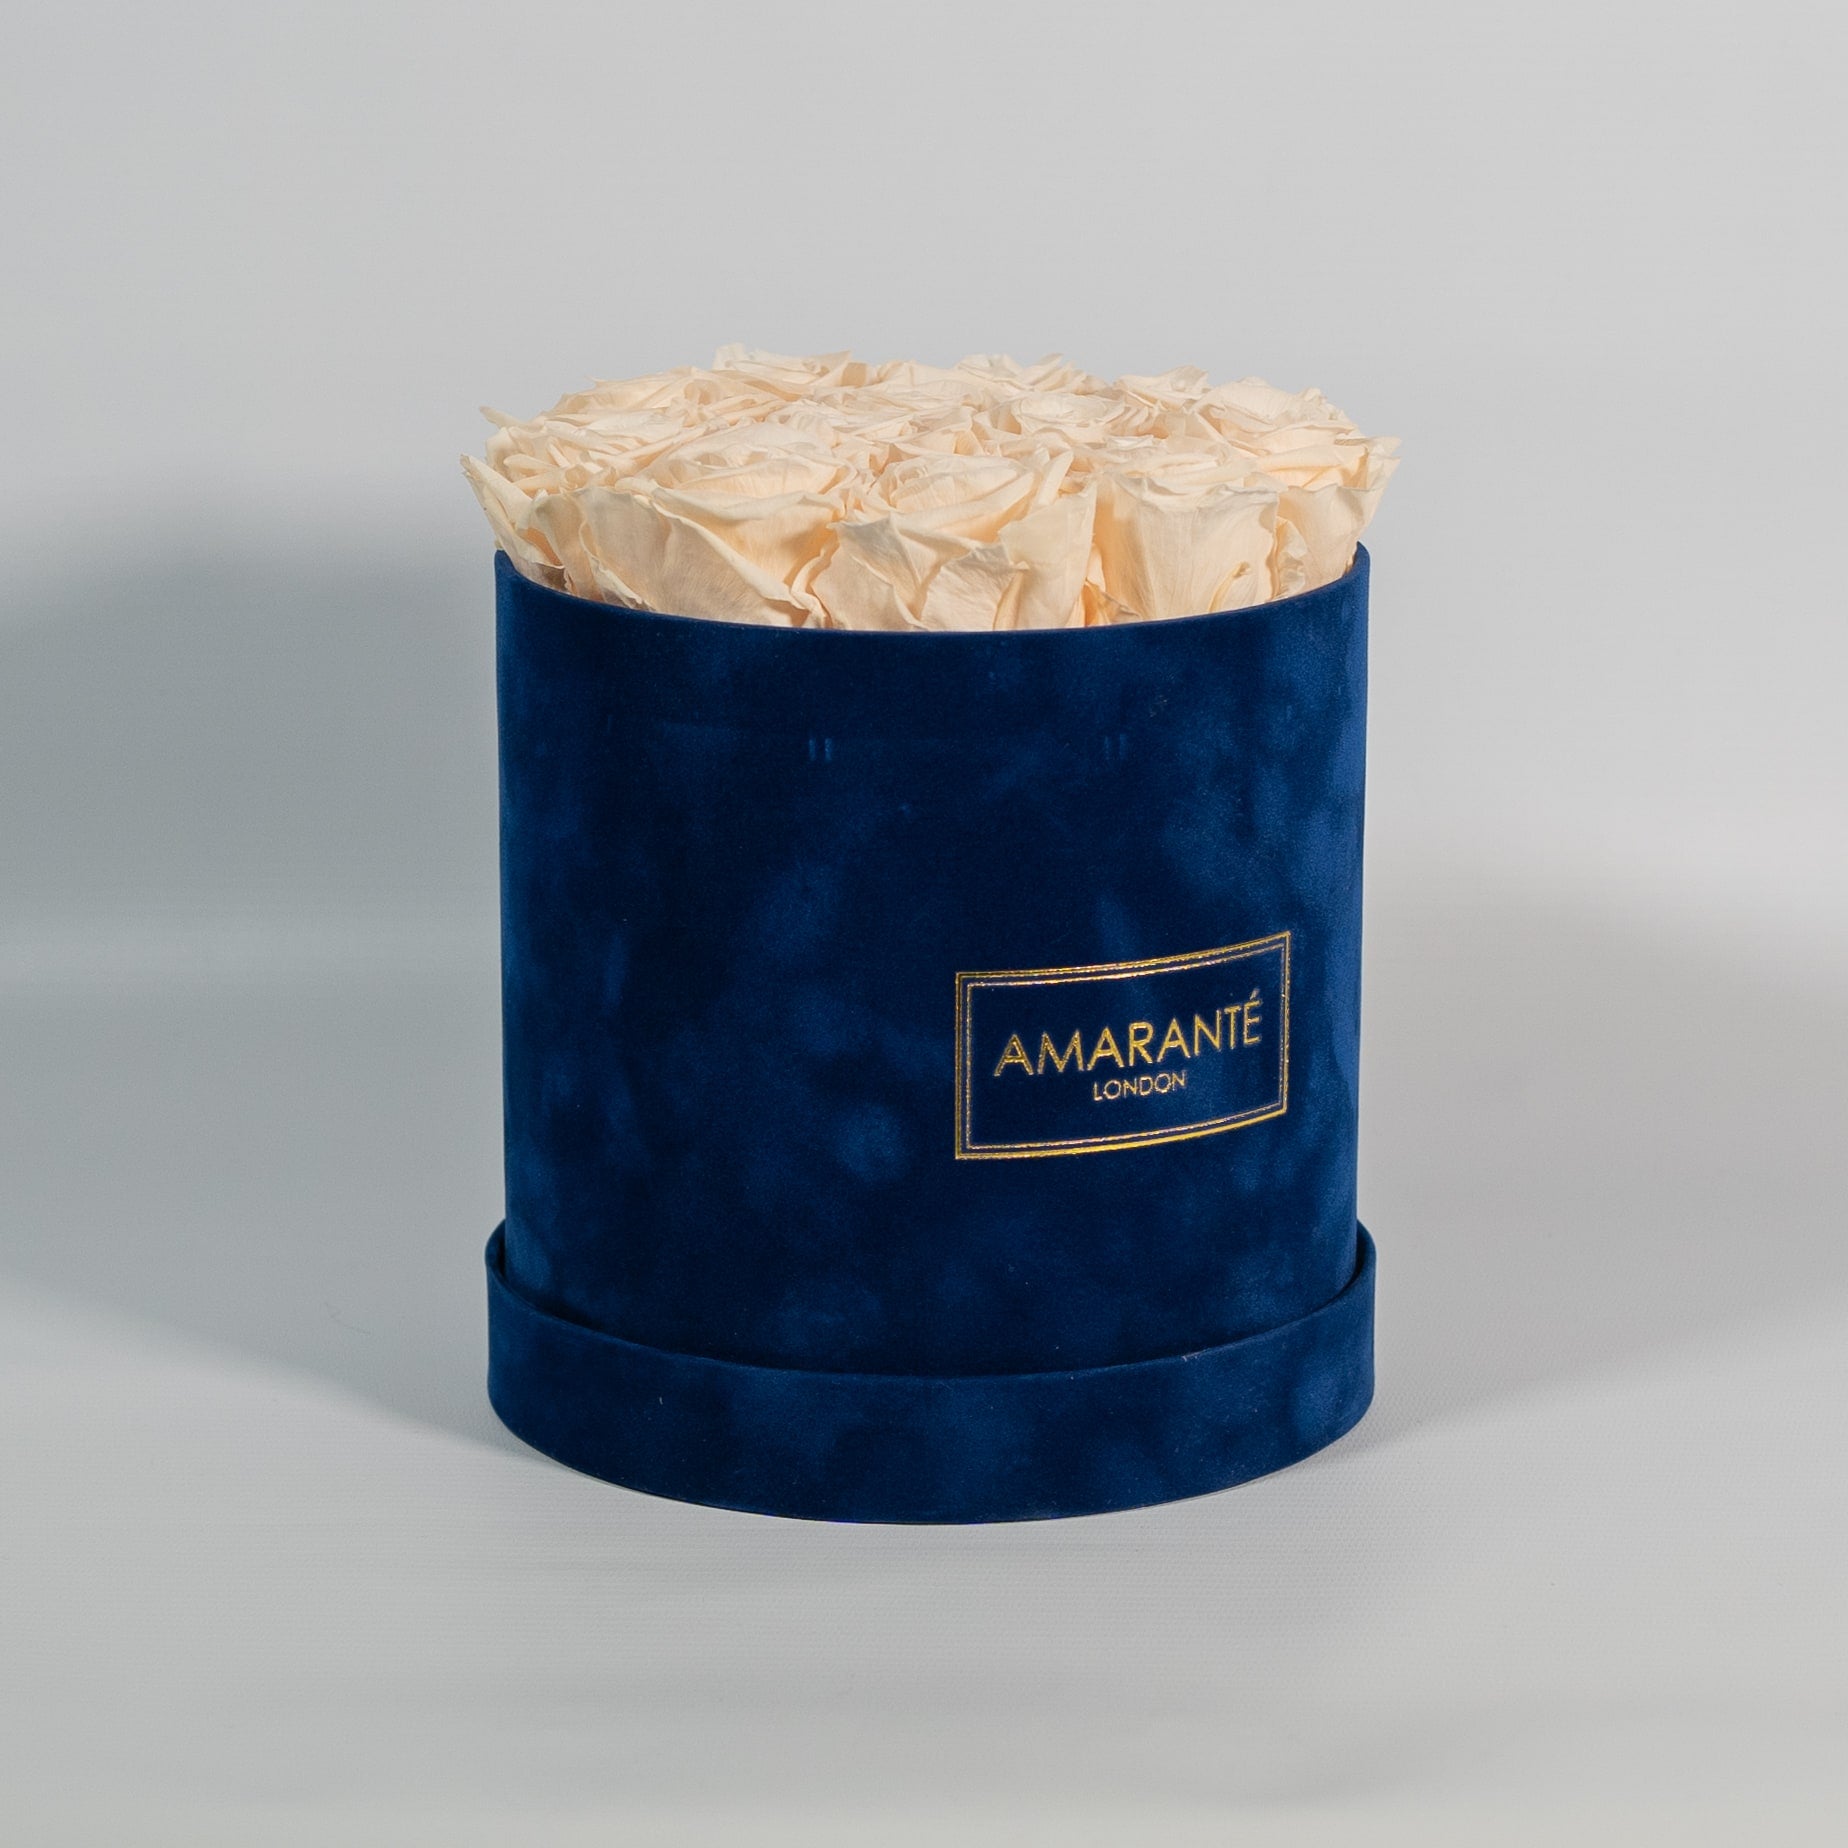 Charming champagne Roses in a chic blue box 